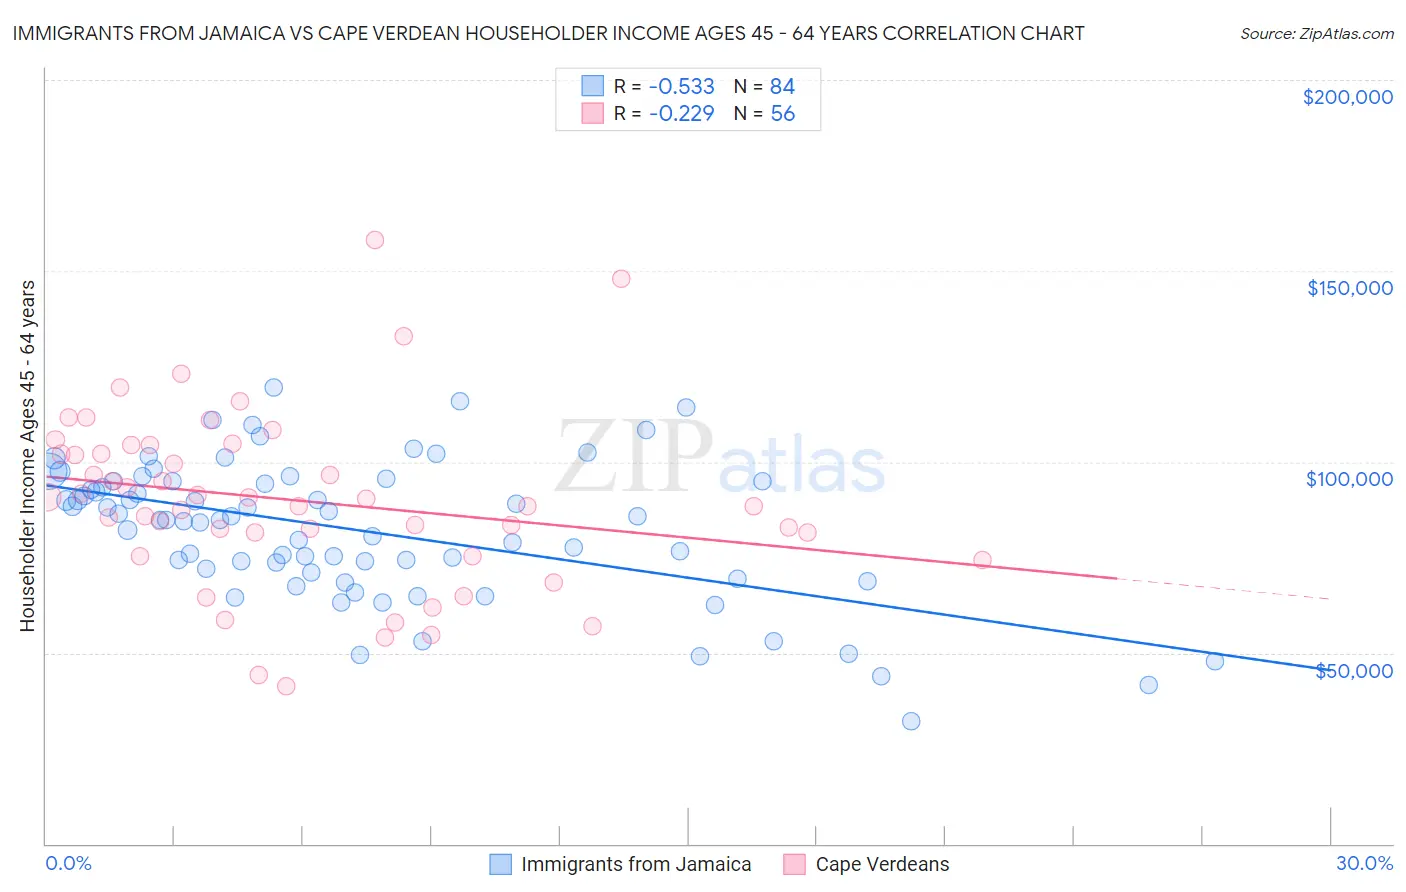 Immigrants from Jamaica vs Cape Verdean Householder Income Ages 45 - 64 years